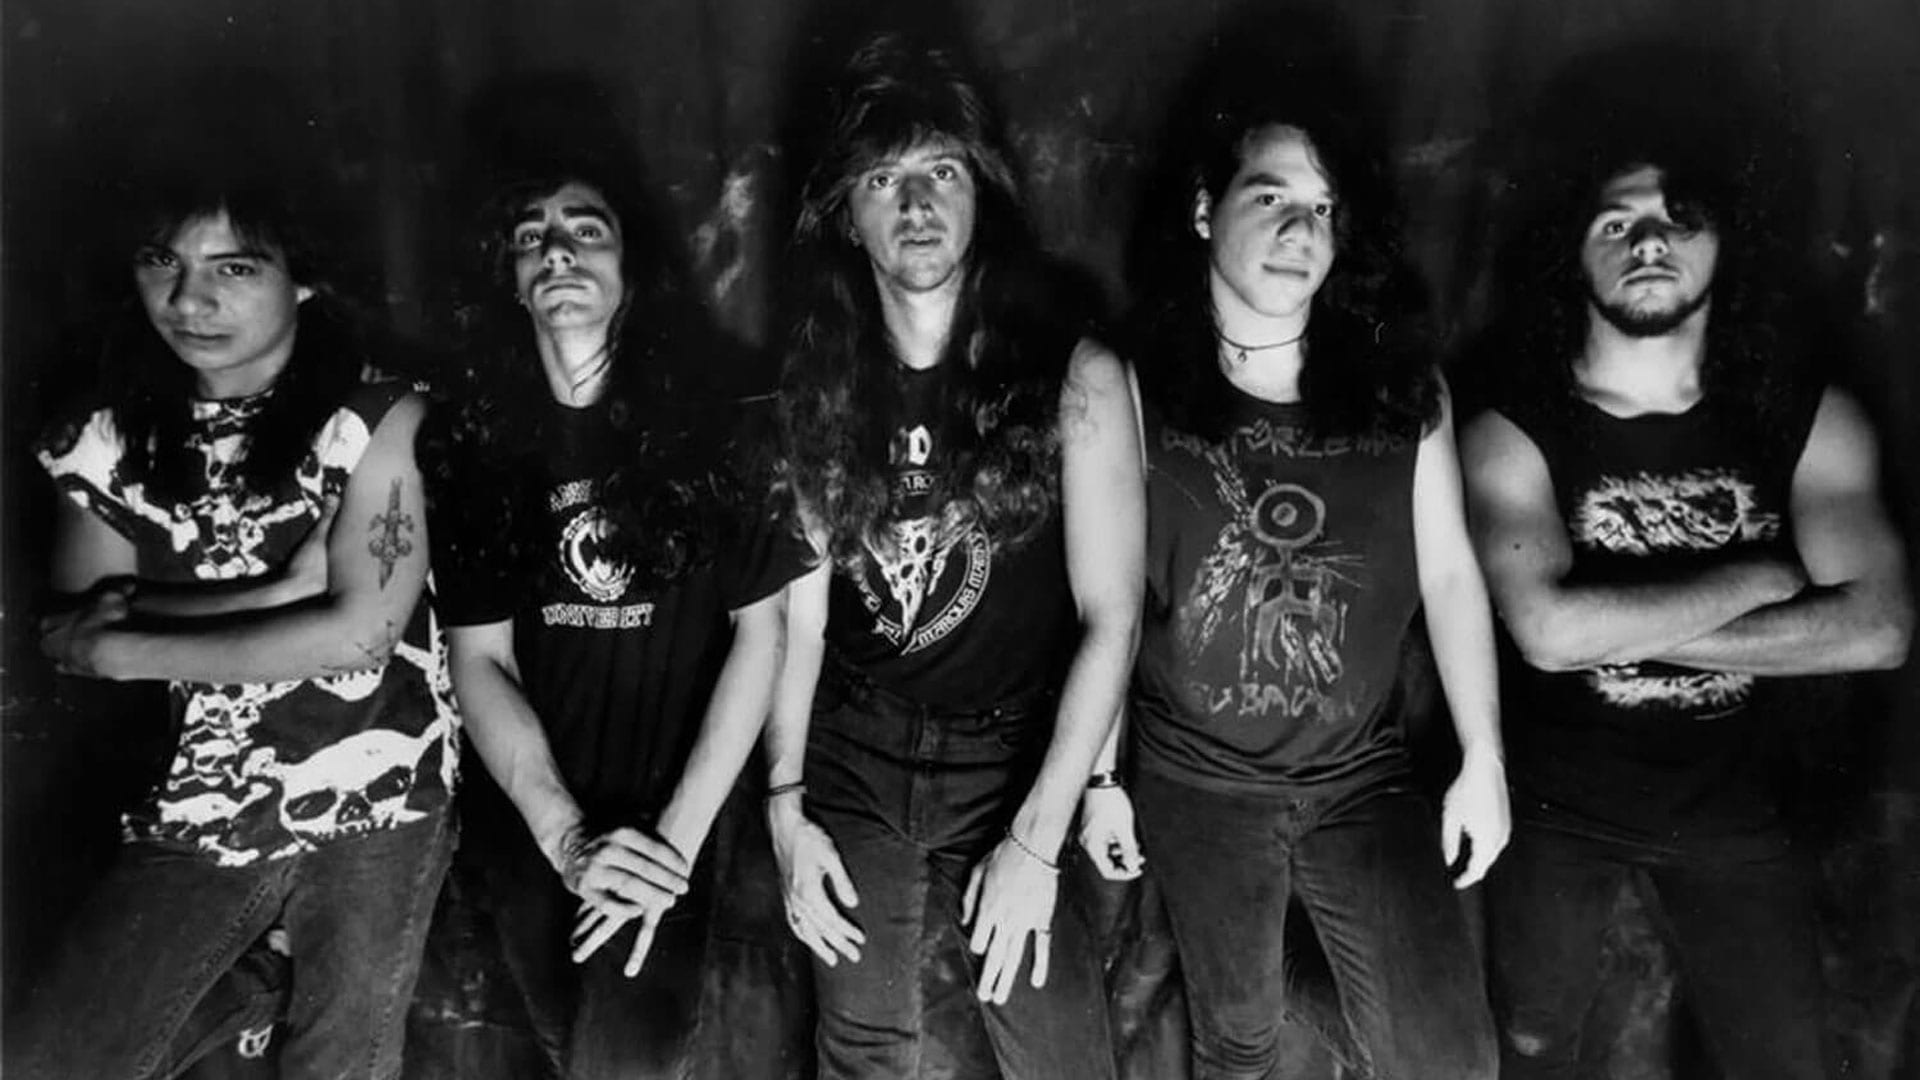 30 Years Ago: SINDROME complete Into the Halls of Extermination debut demo